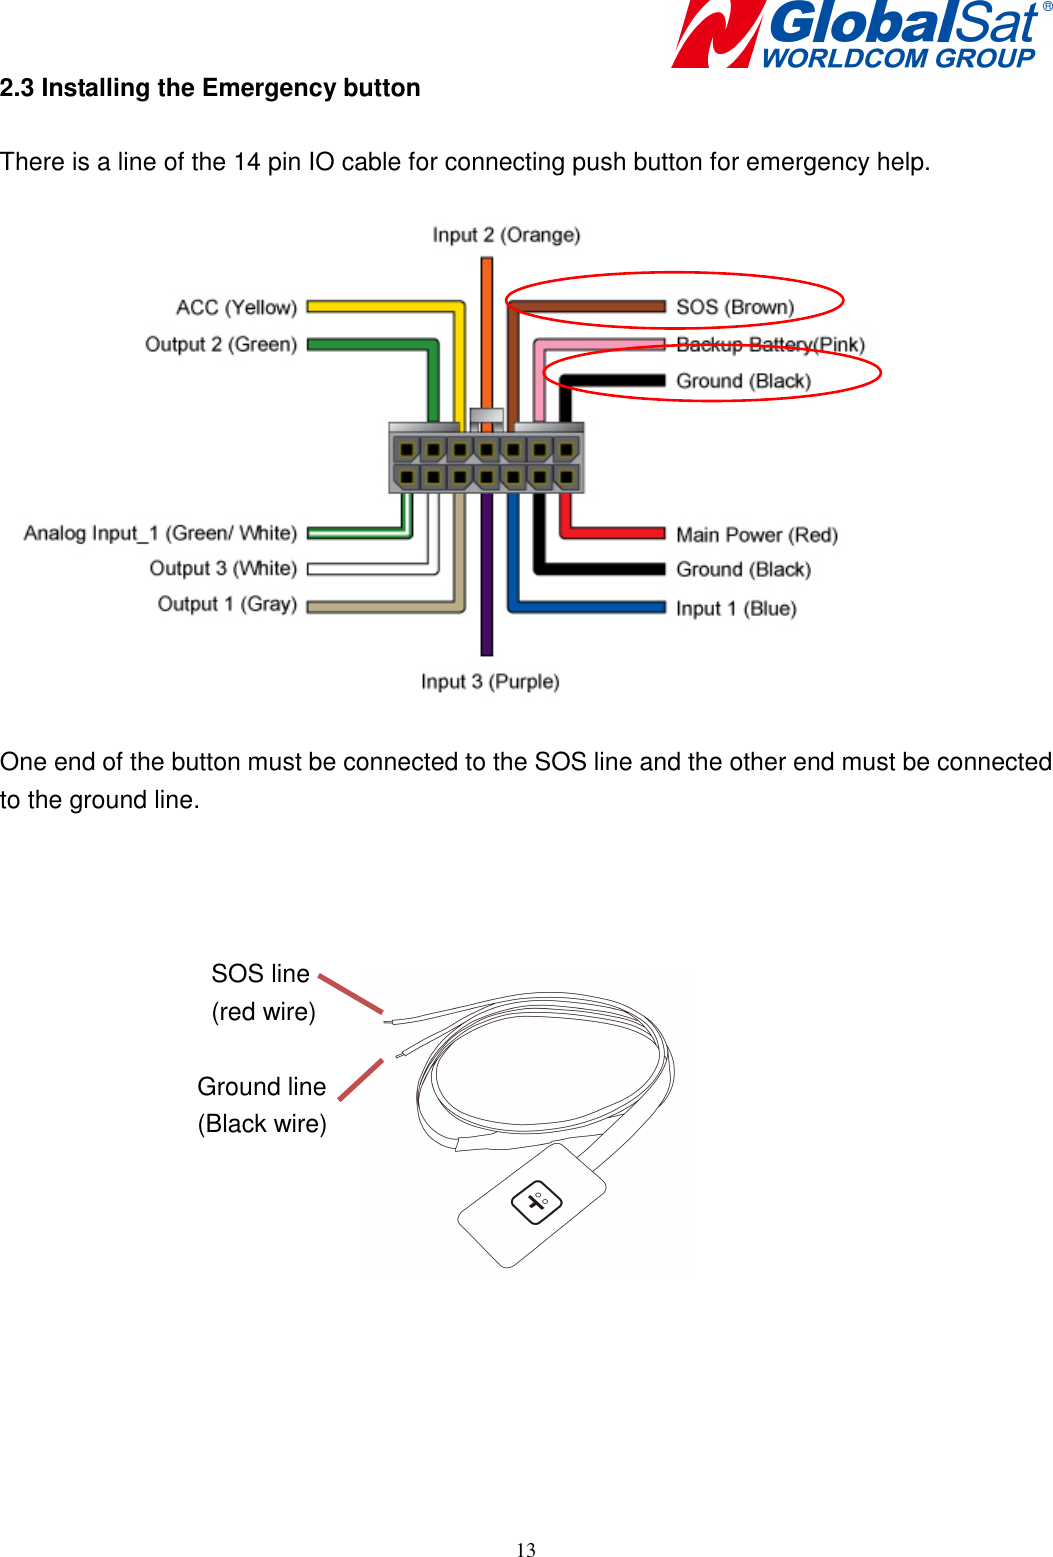    132.3 Installing the Emergency button  There is a line of the 14 pin IO cable for connecting push button for emergency help.    One end of the button must be connected to the SOS line and the other end must be connected to the ground line.          SOS line (red wire) Ground line (Black wire) 